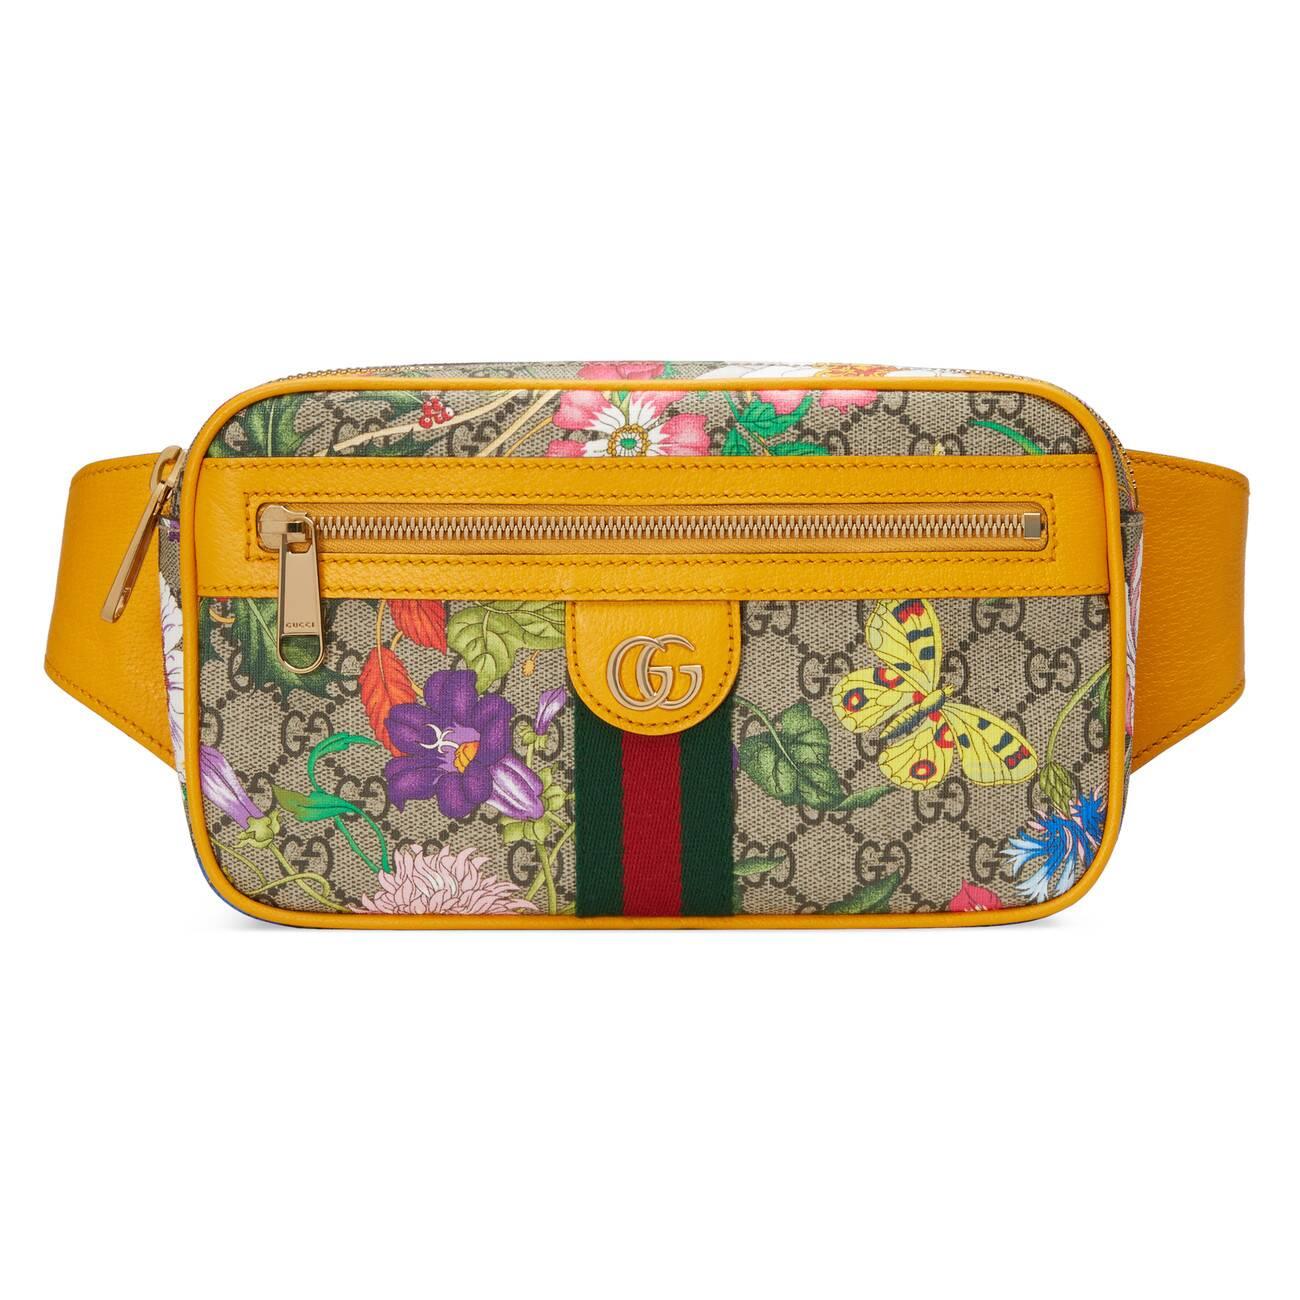 Gucci Ophidia GG Flora Belt Bag in Yellow | Lyst